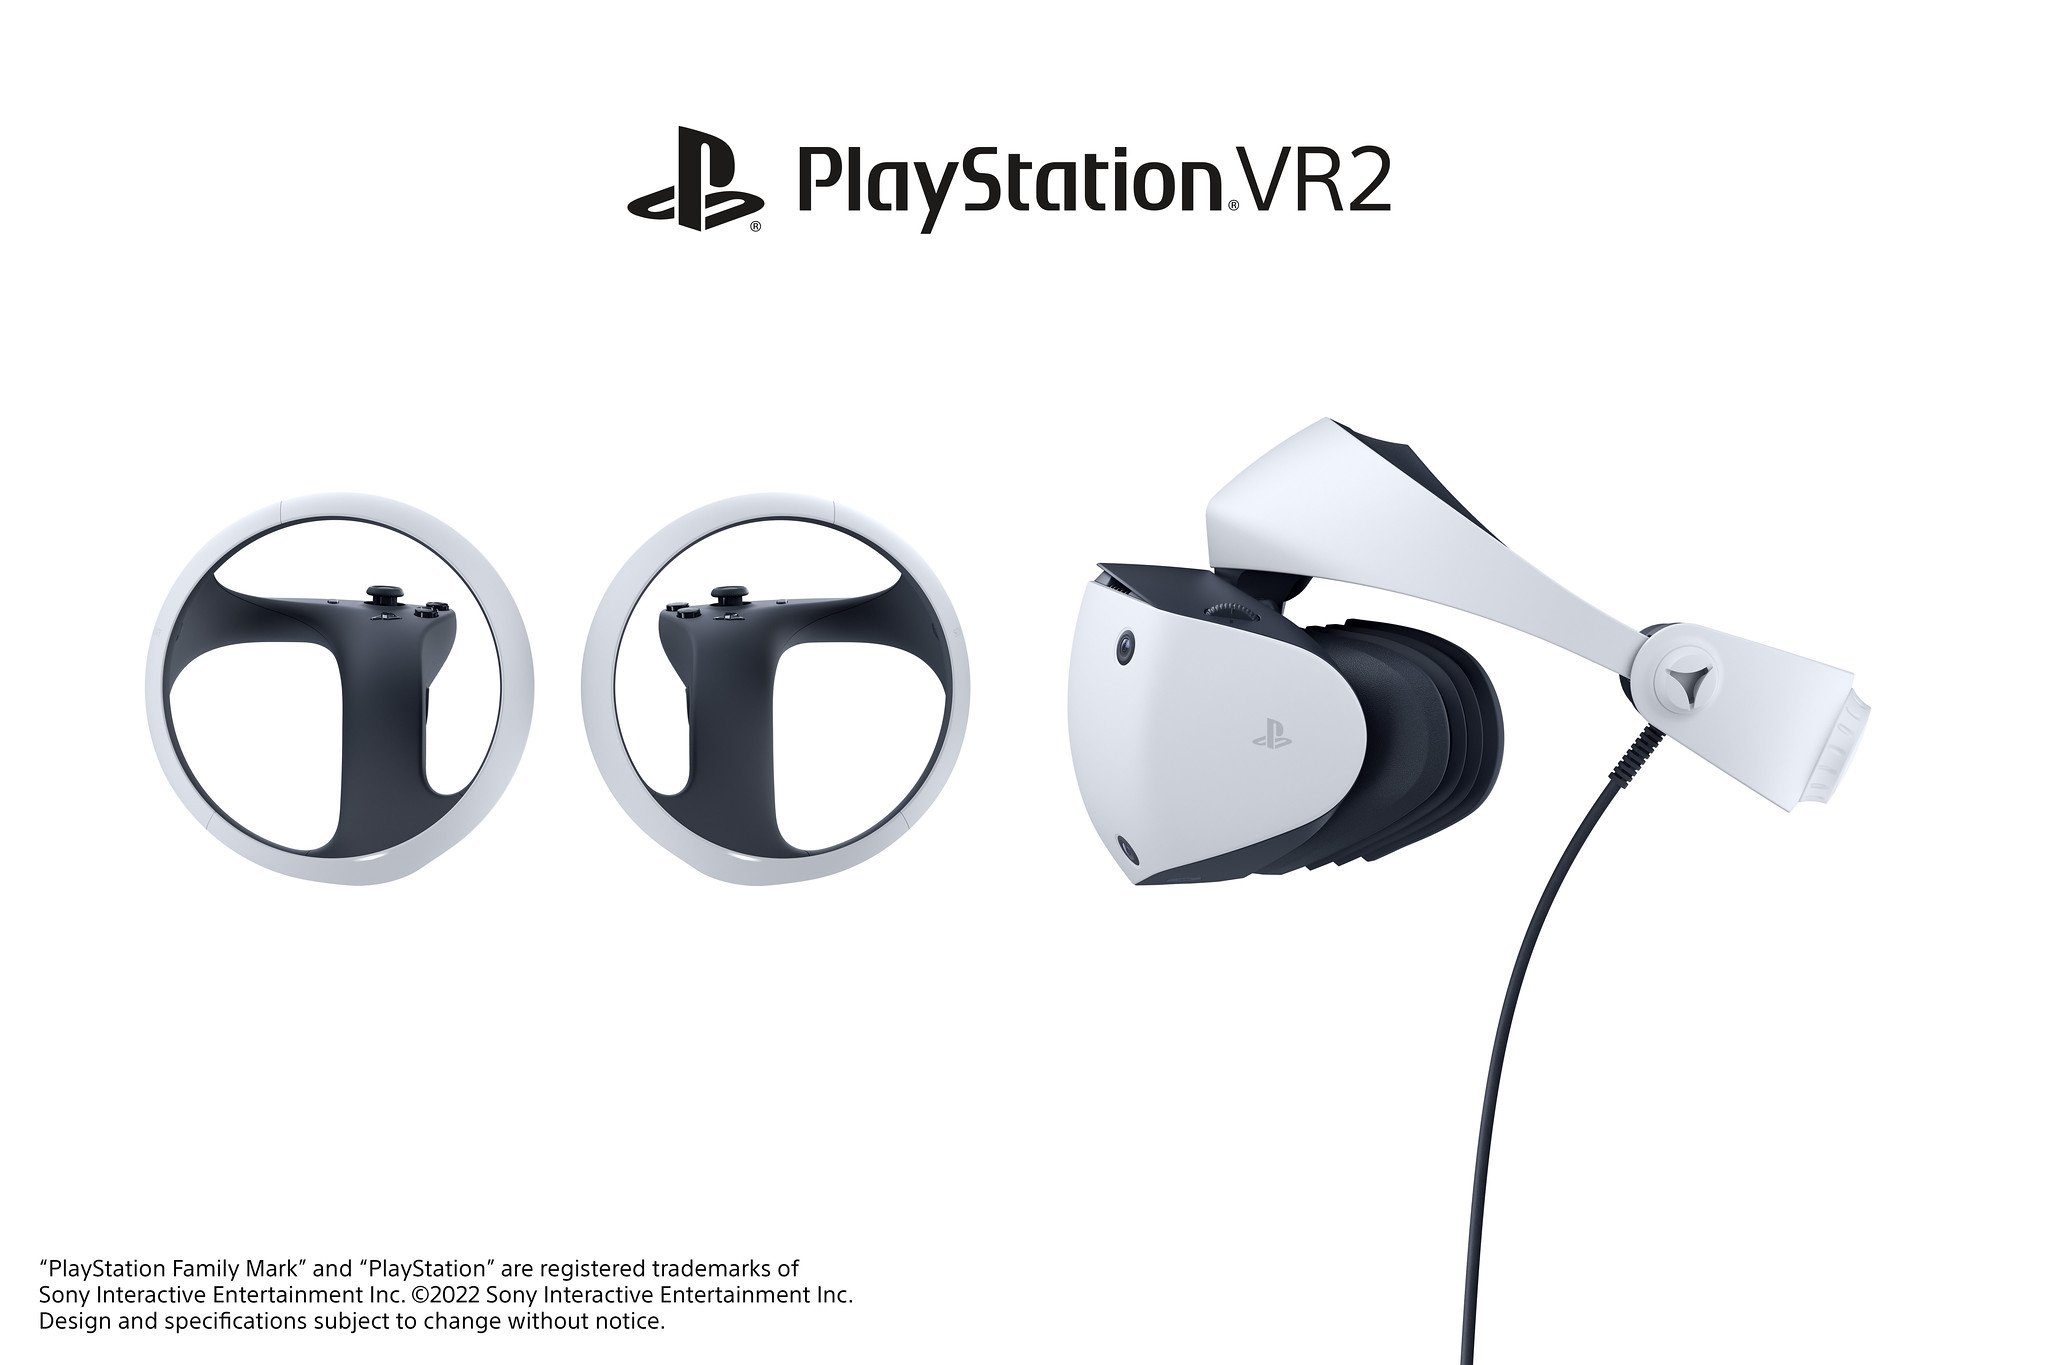 PSVR 2 Hands-On: The Future of VR Gaming 